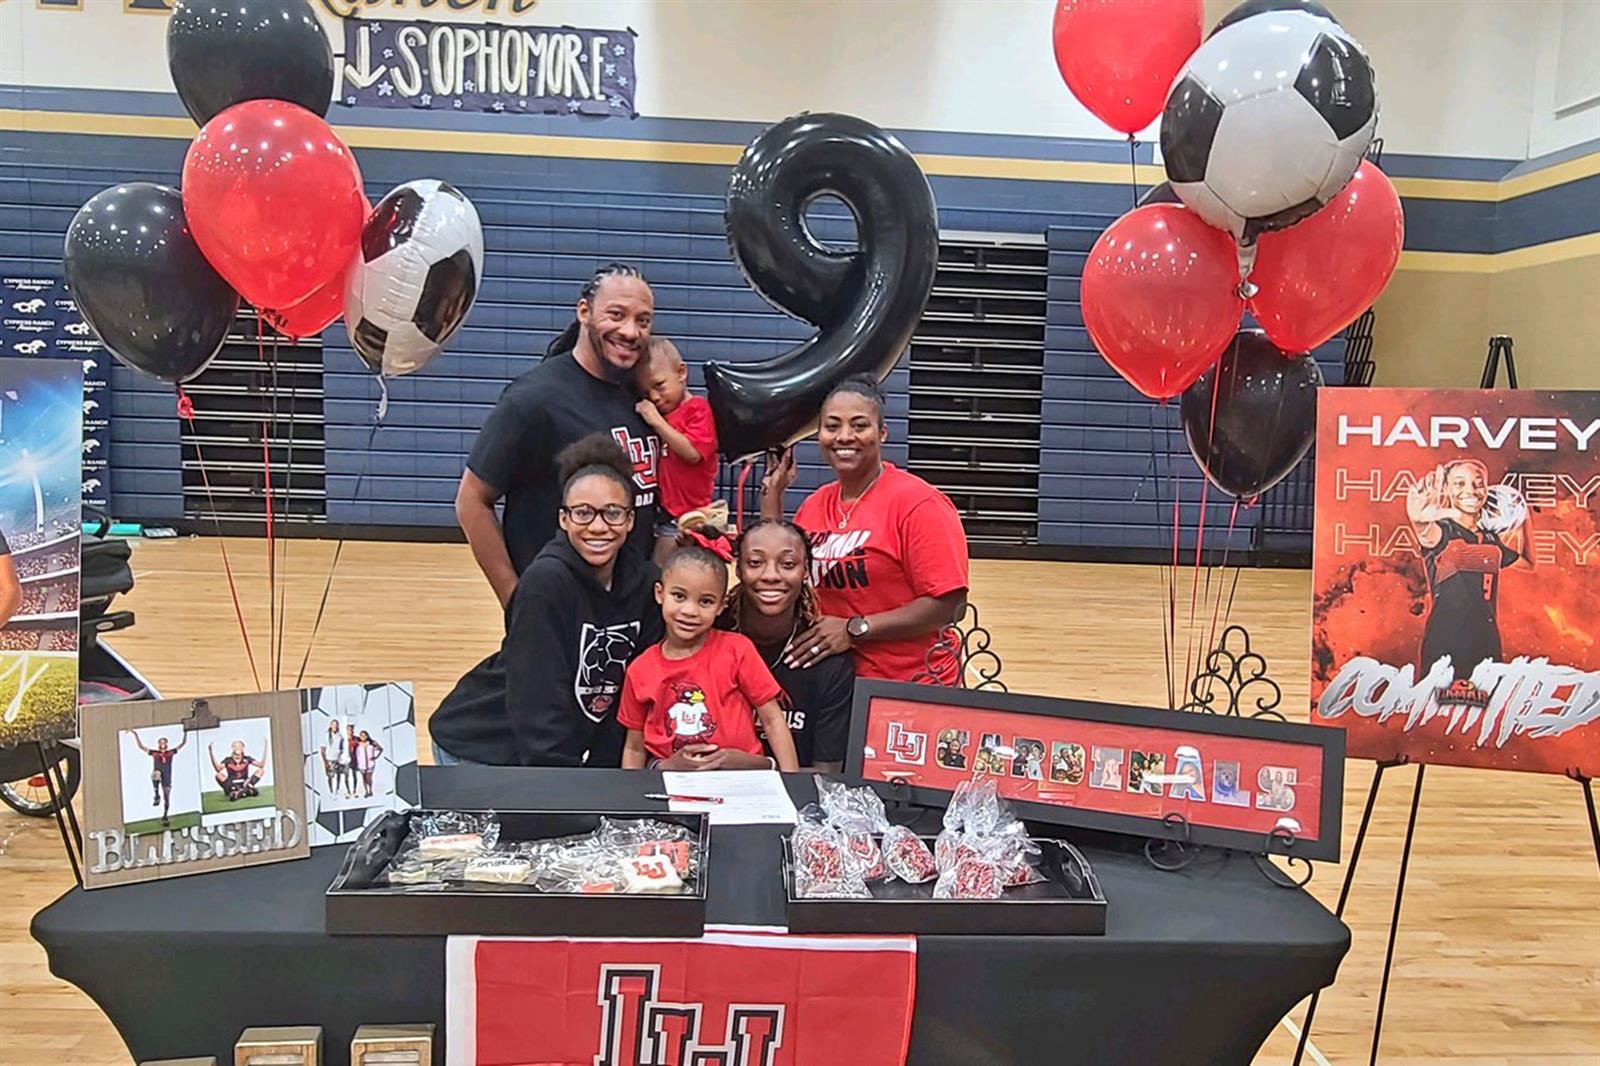 Cypress Ranch High School senior Kamryn Harvey, second from right, signed a letter of intent to Lamar University.